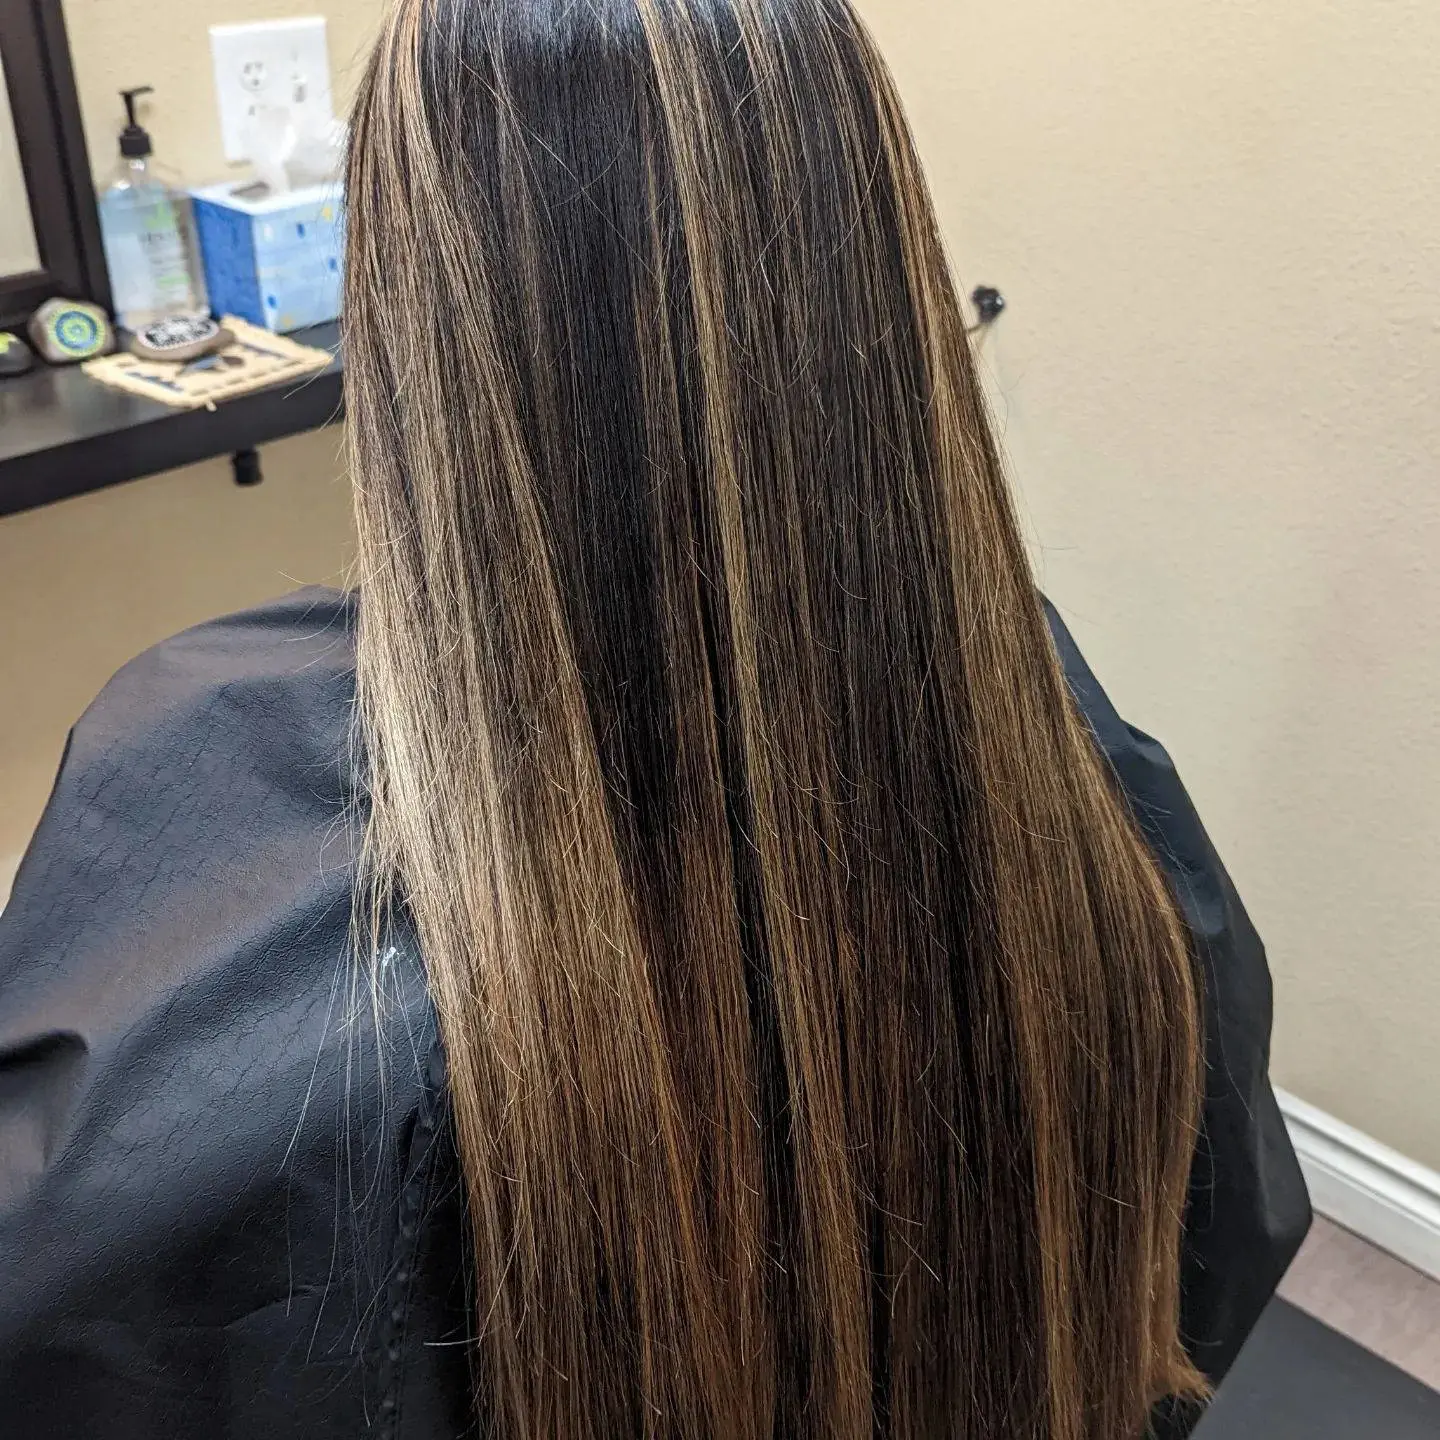 Image of balayage hair color repaired at a hair salon in Redmond Oregon